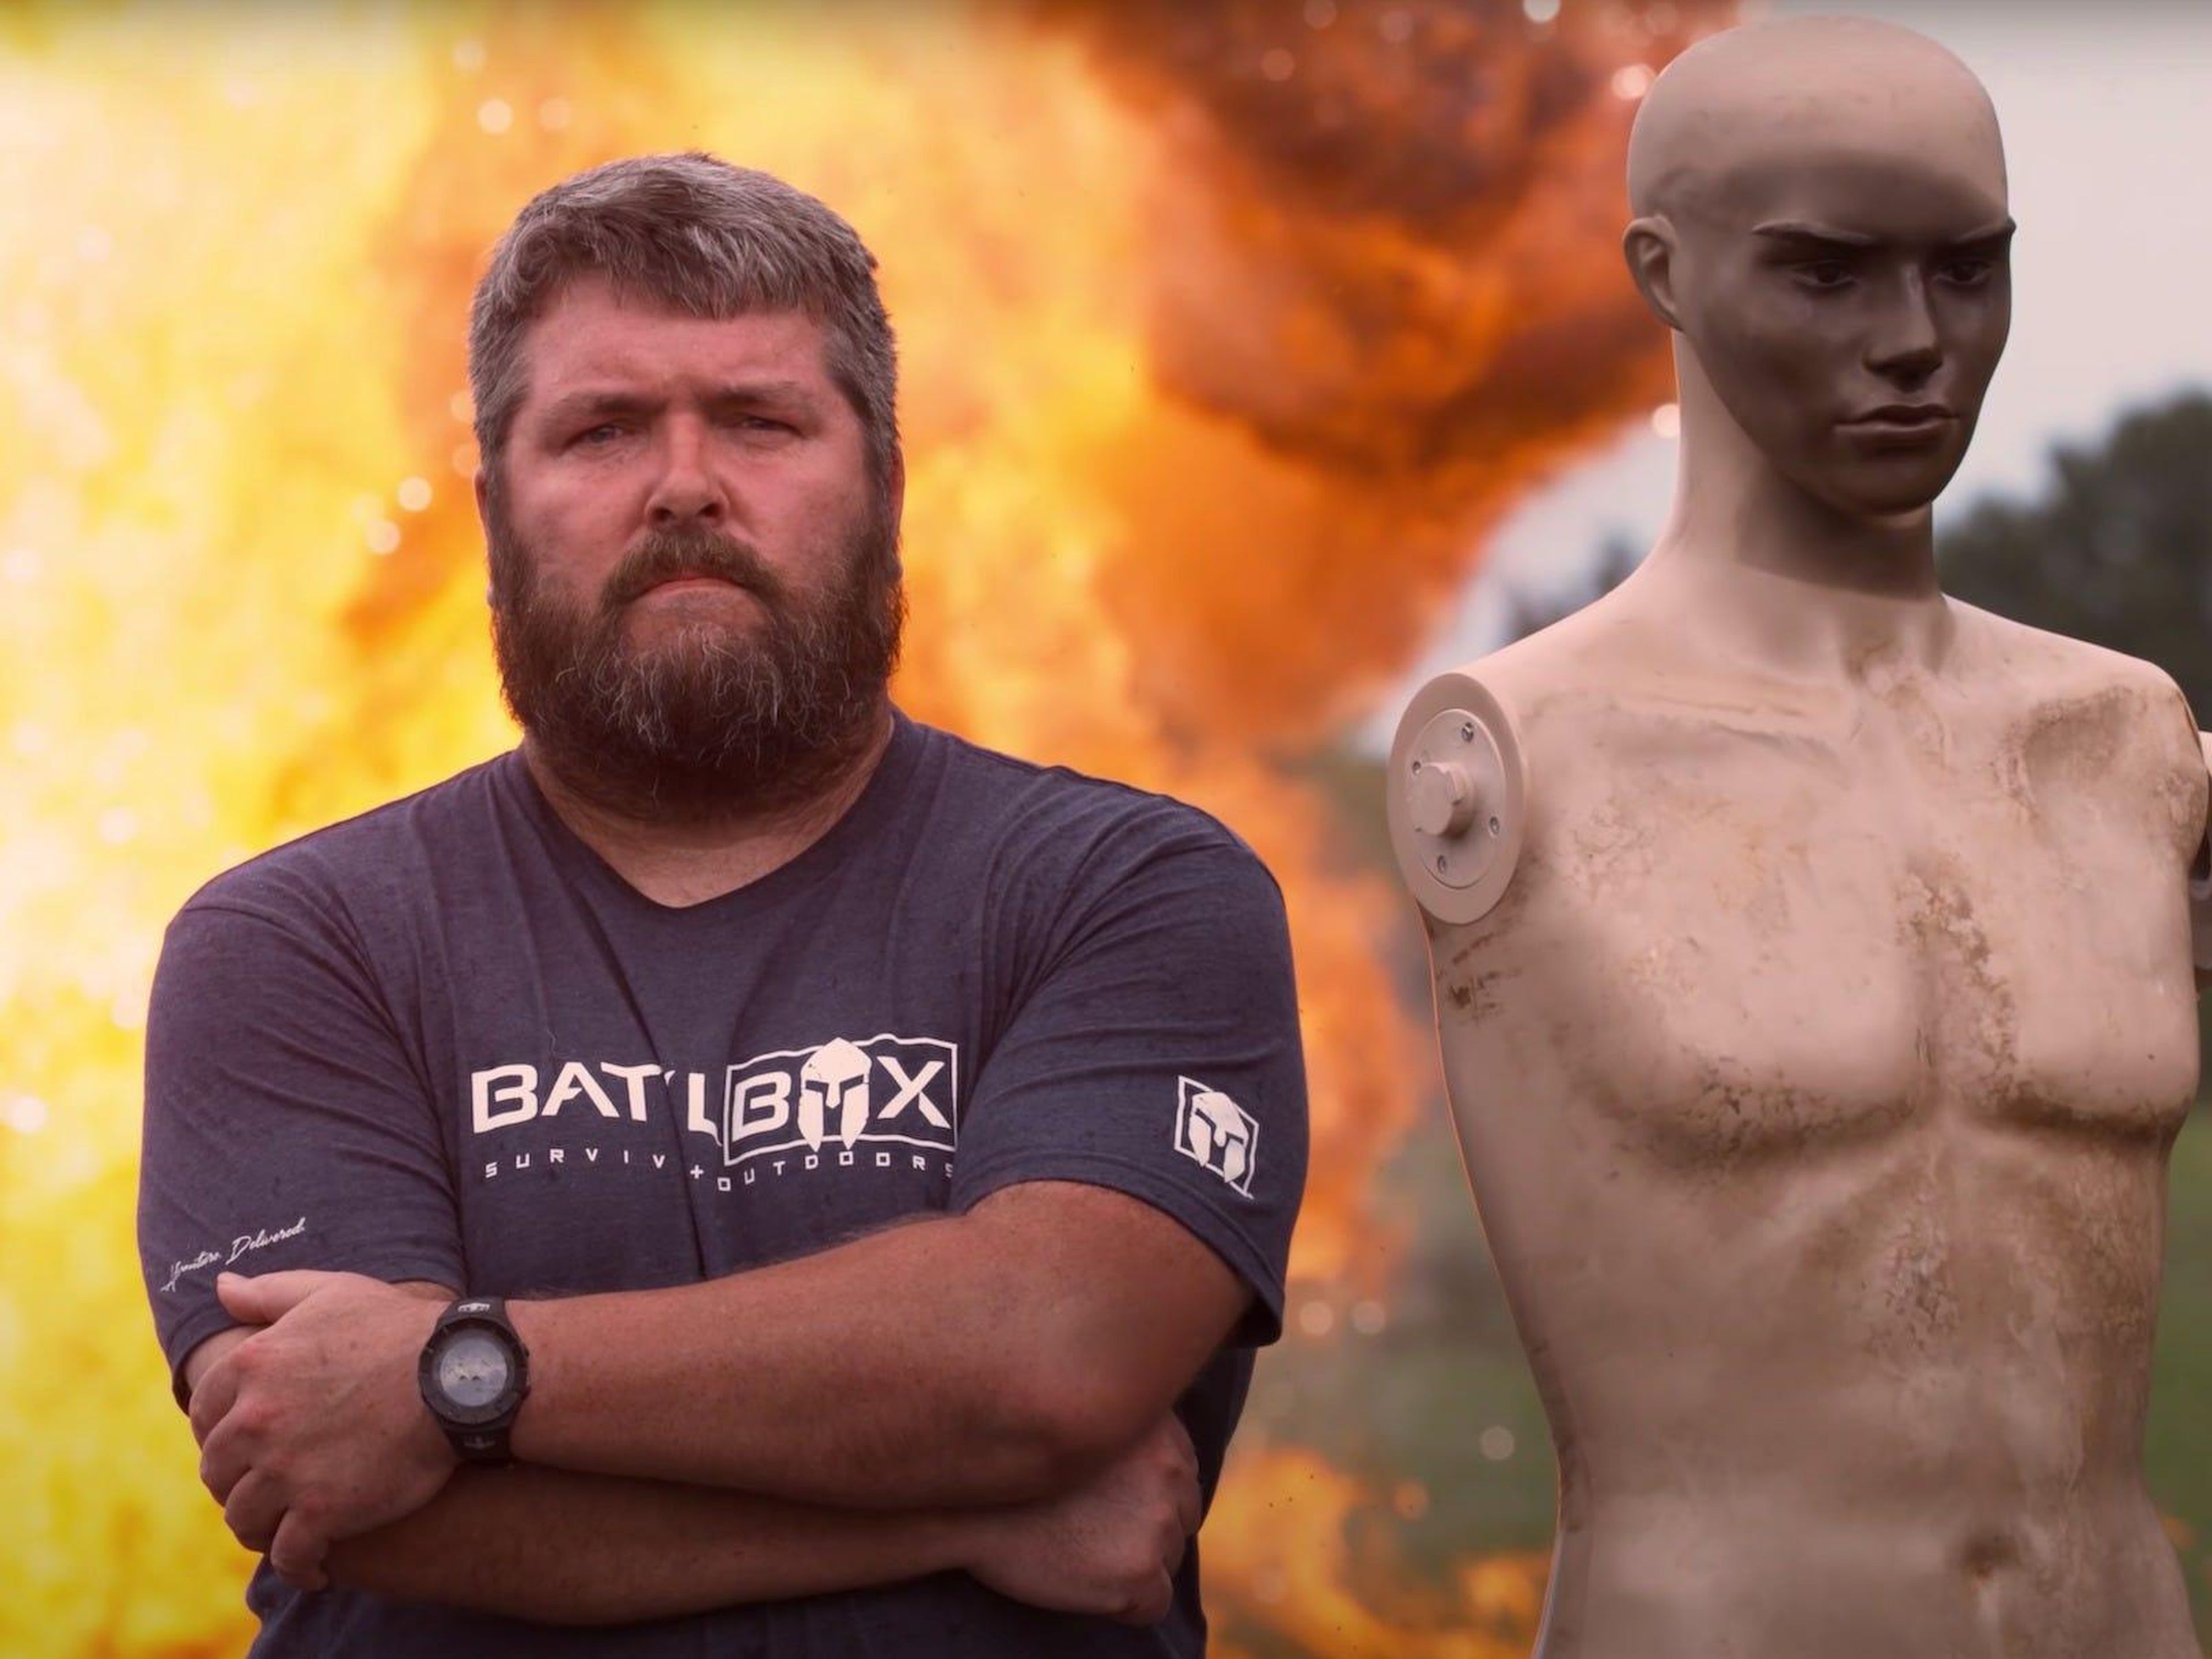 "The BattlBox crew tests out a variety of products designed to help people survive dangerous situations, including fires, explosions and intruders."